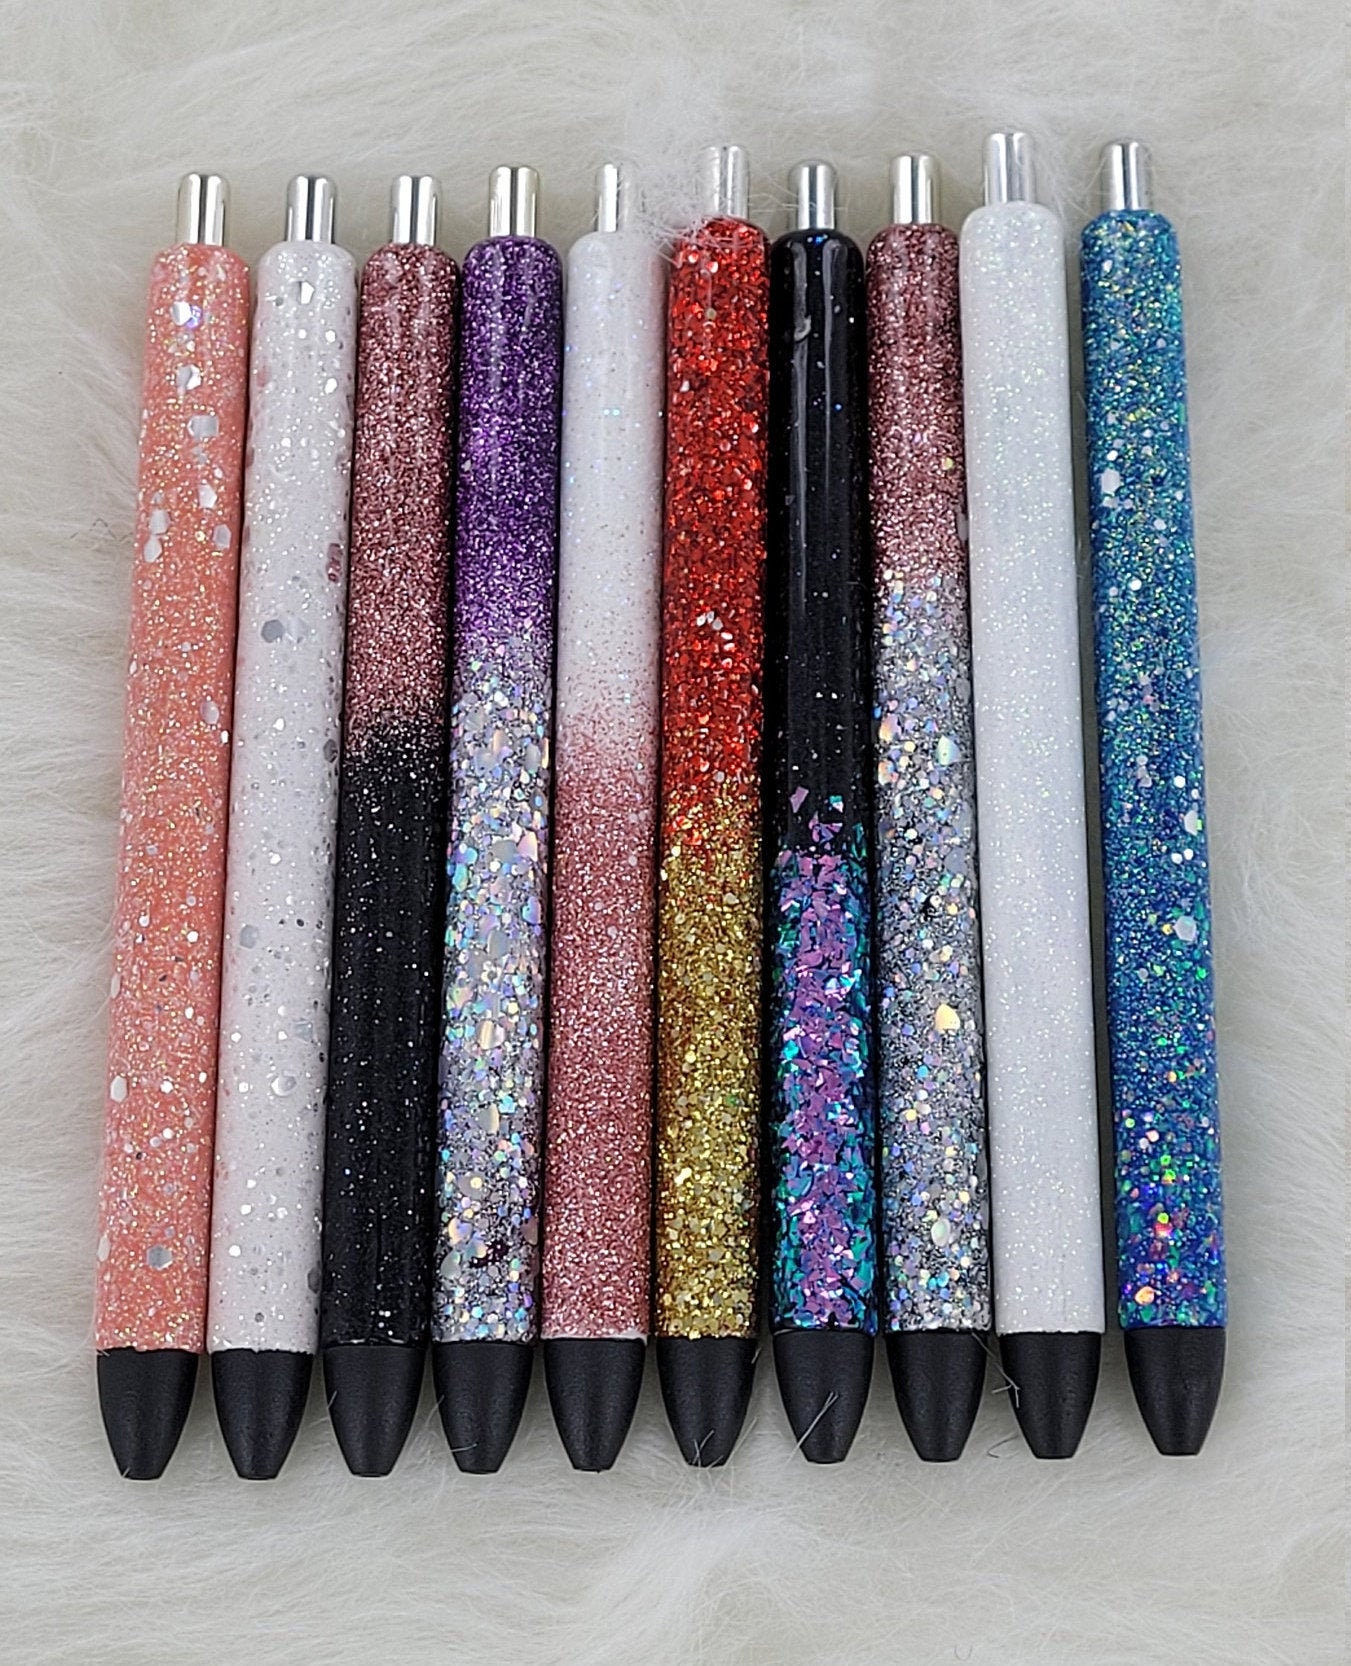 ON SALE Glitter / Solid Color GEL Pens Completely Customizable 